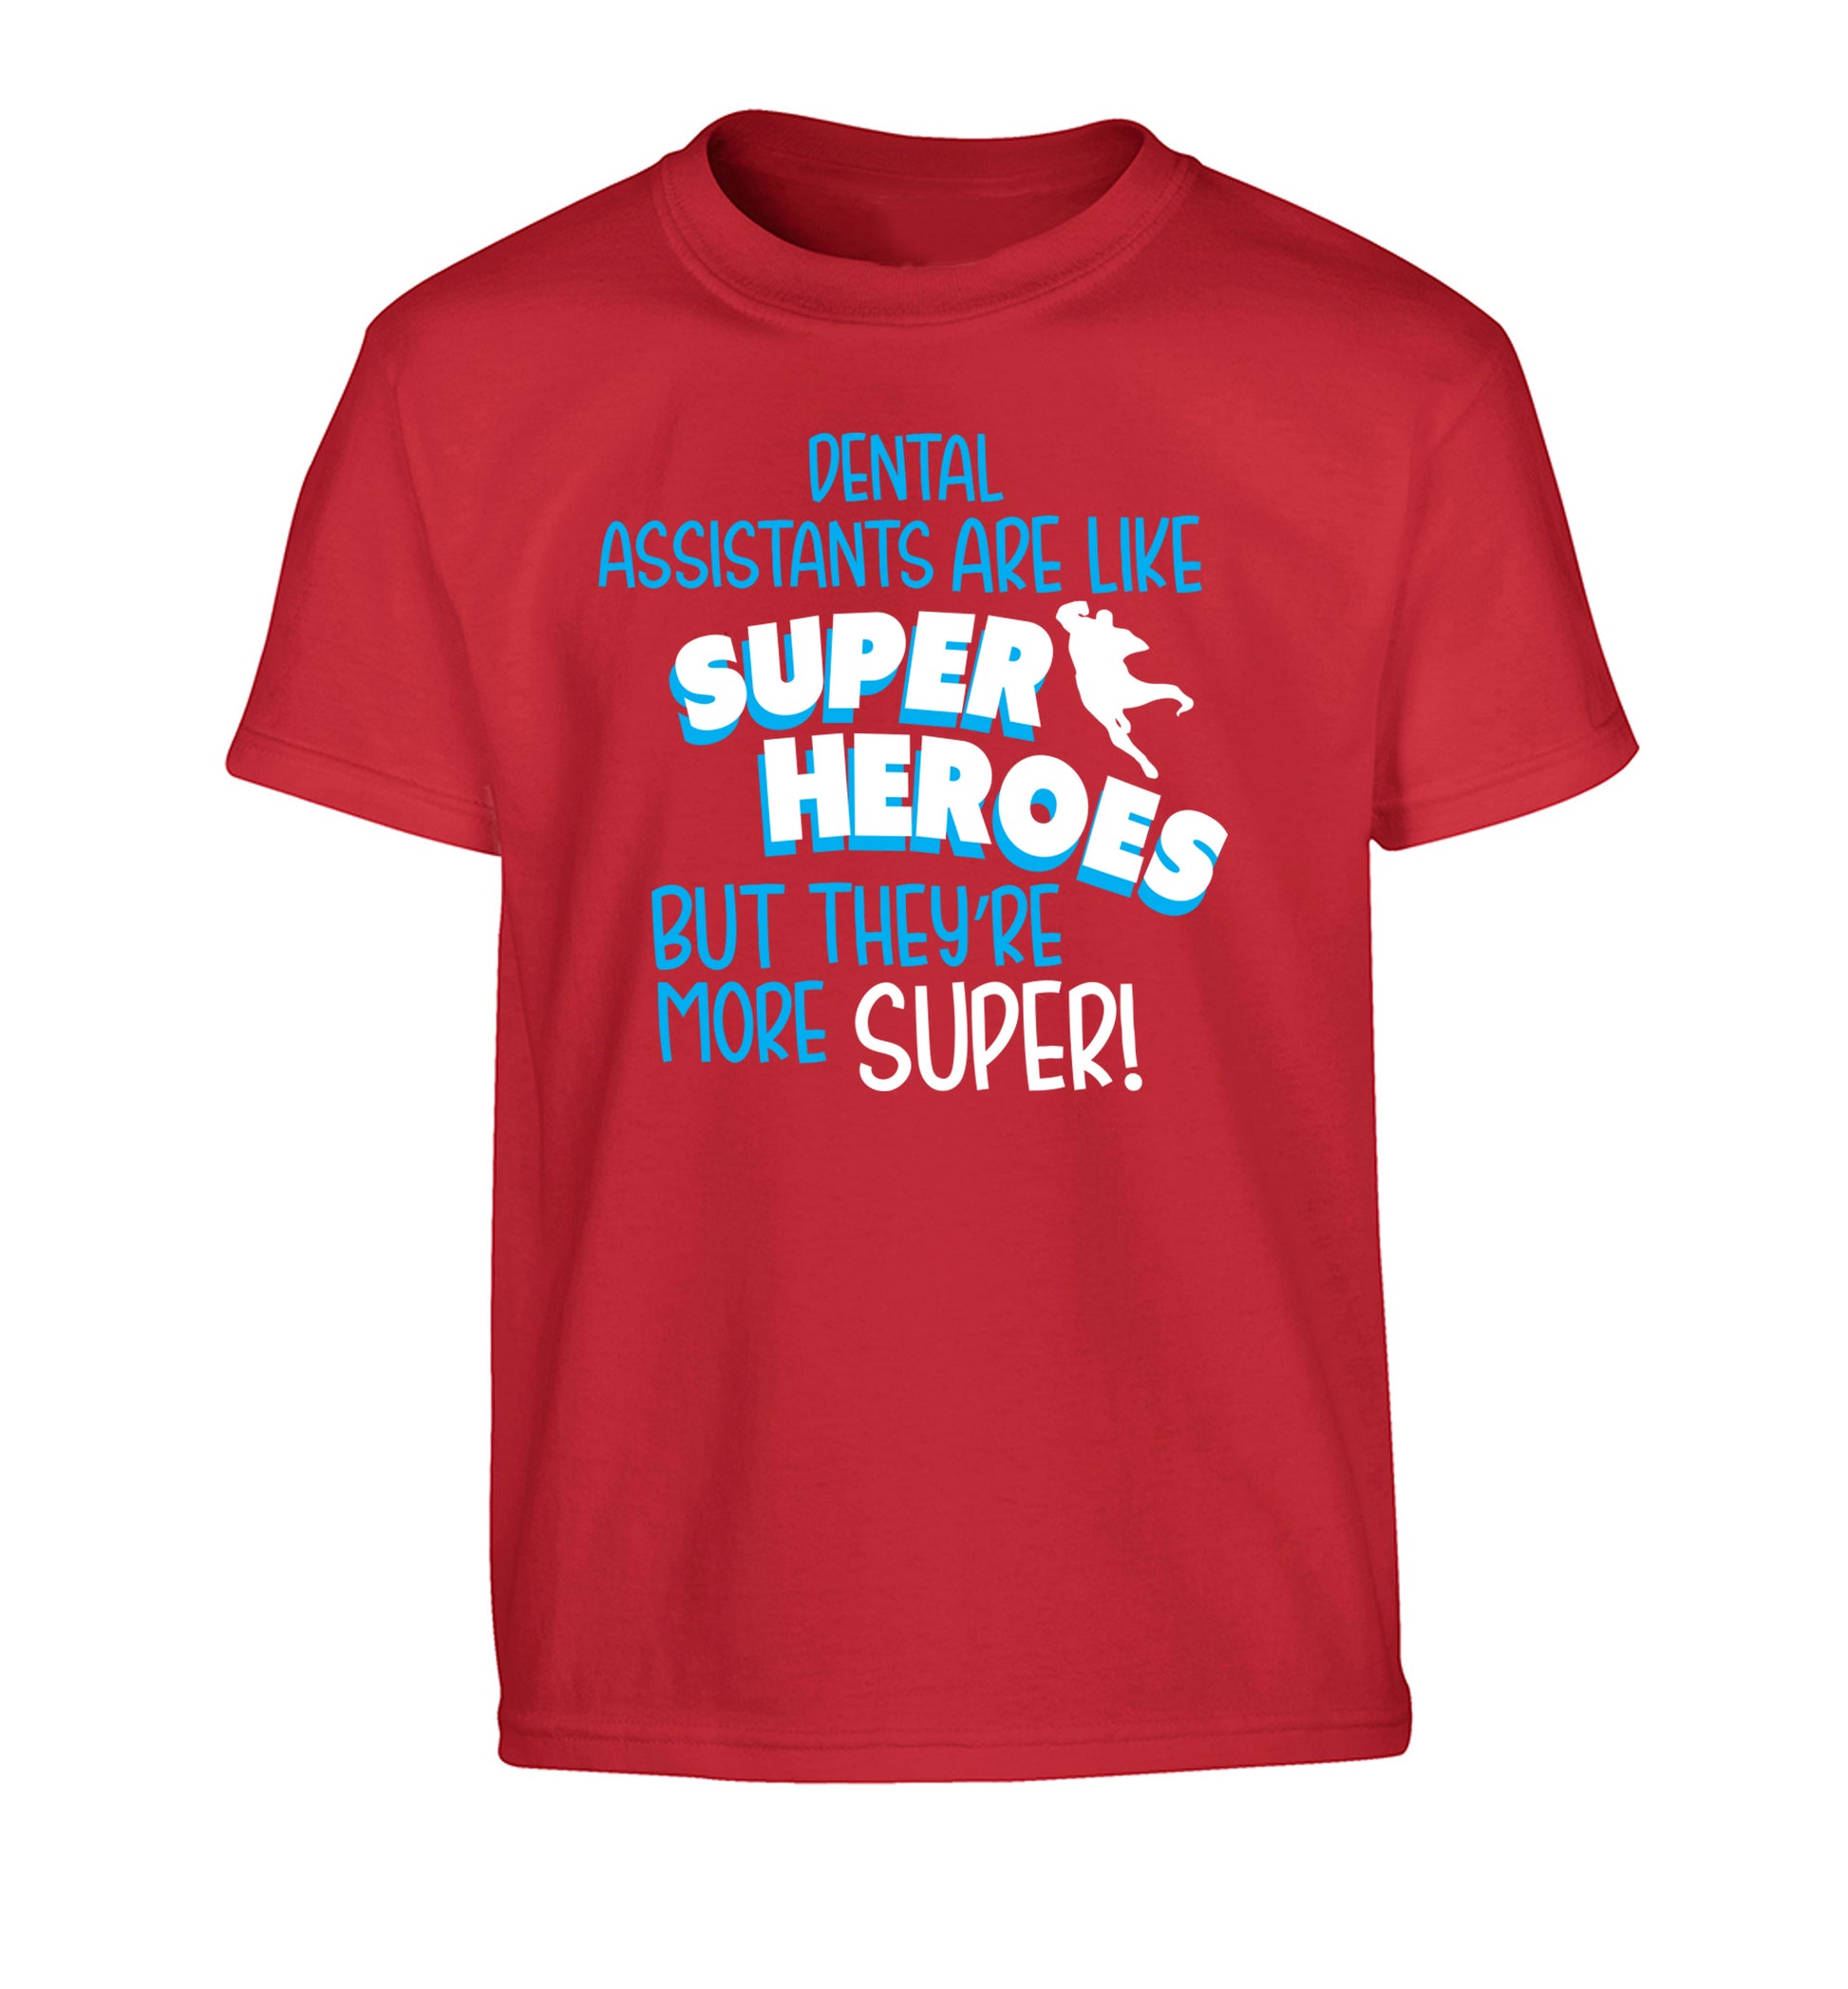 Dental Assistants are like superheros but they're more super Children's red Tshirt 12-13 Years